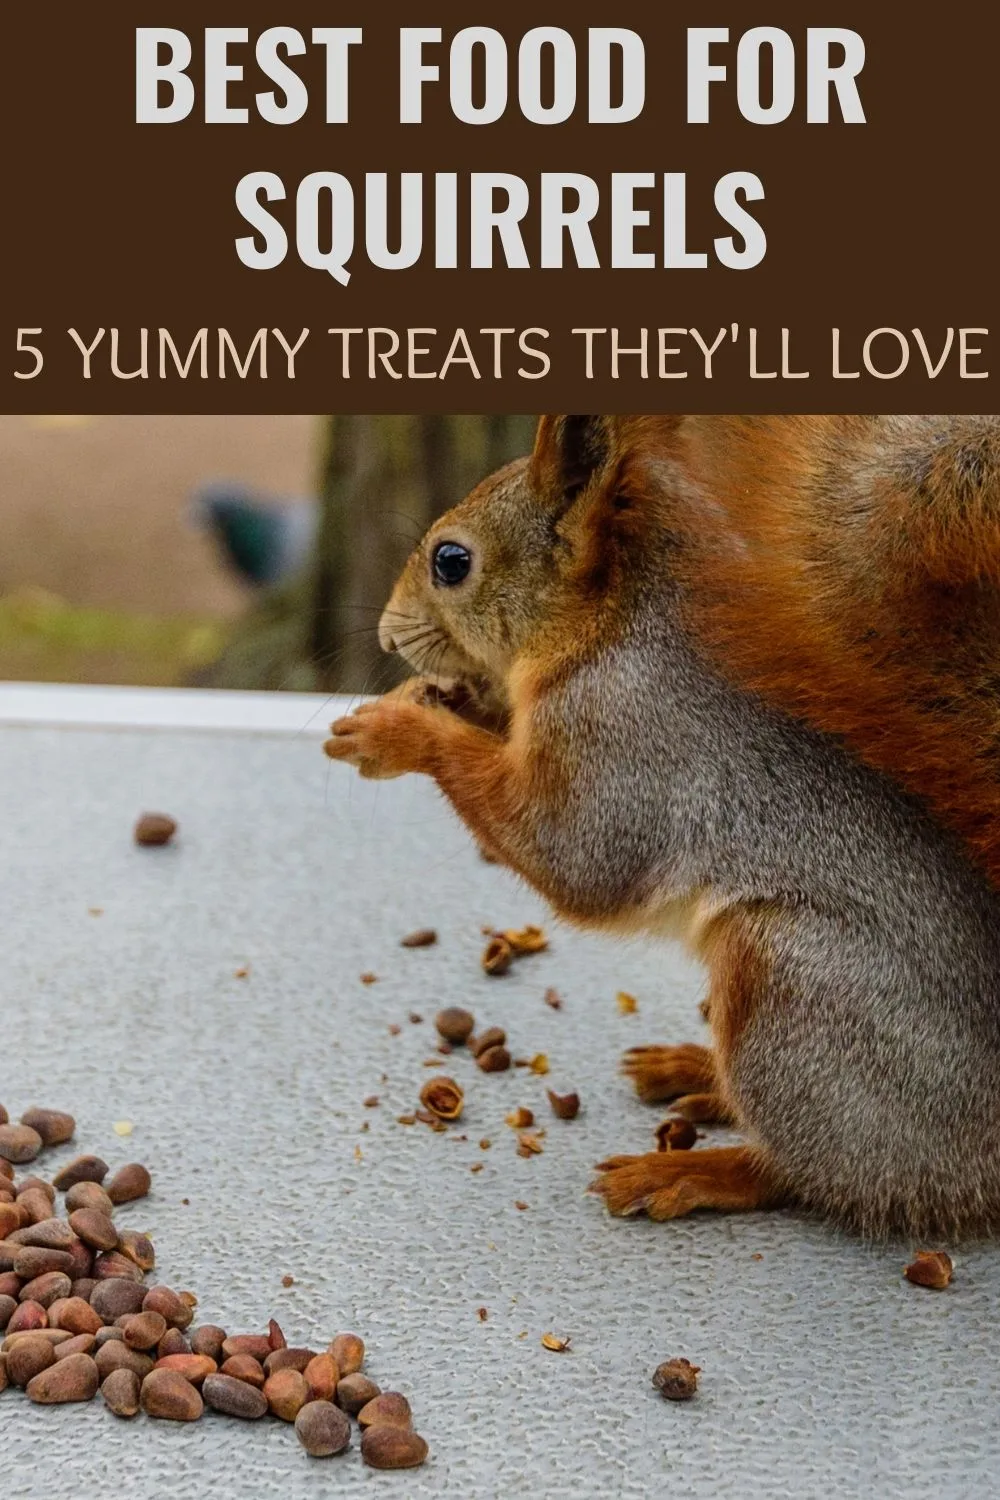 Best food for squirrels - 5 treats they'll love